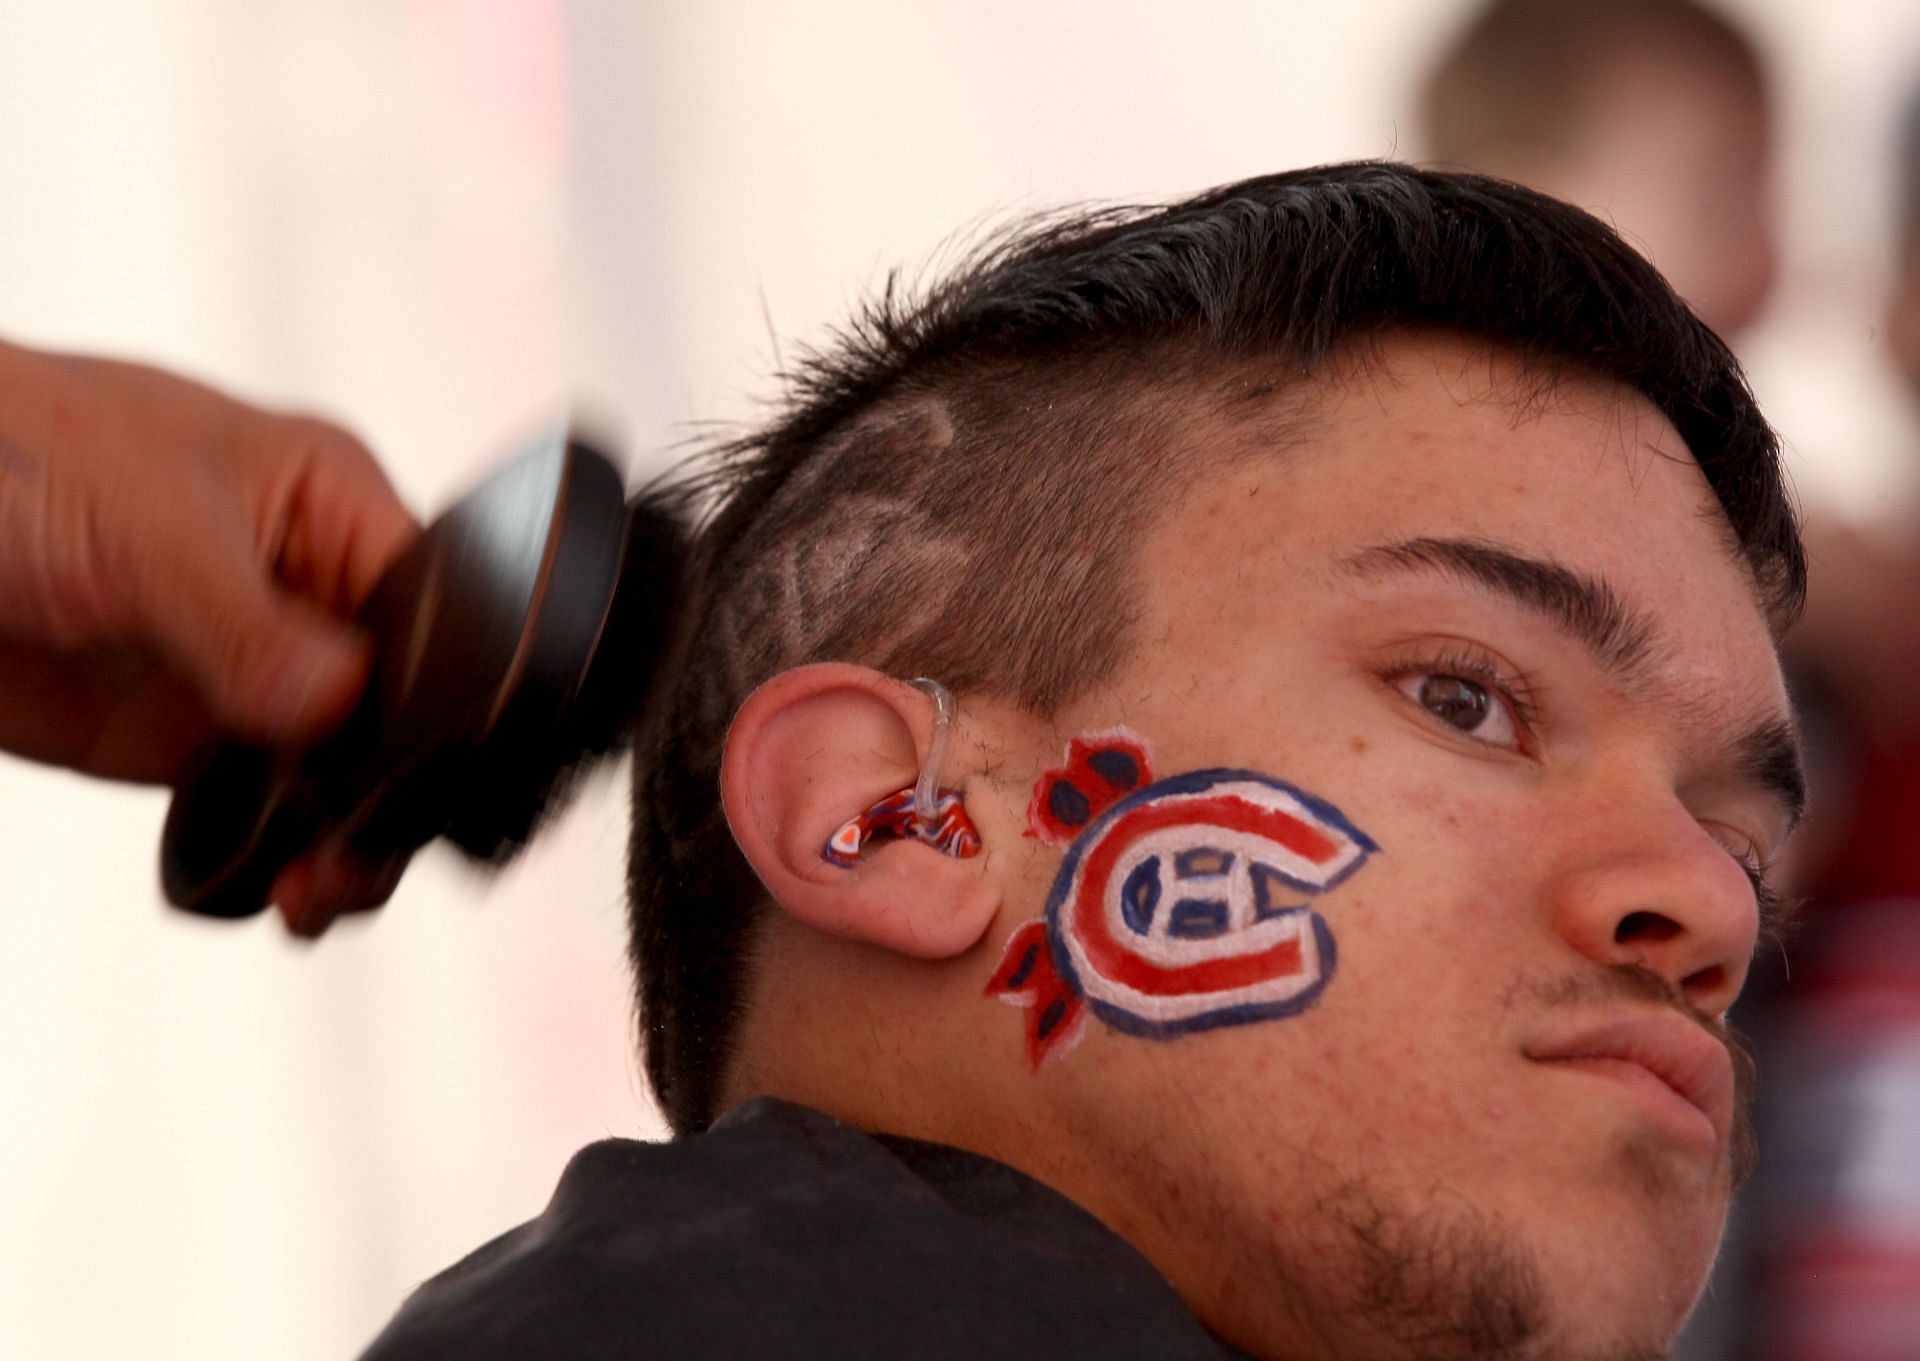 The Montreal Canadiens host an Indigenous Celebration Night on Saturday